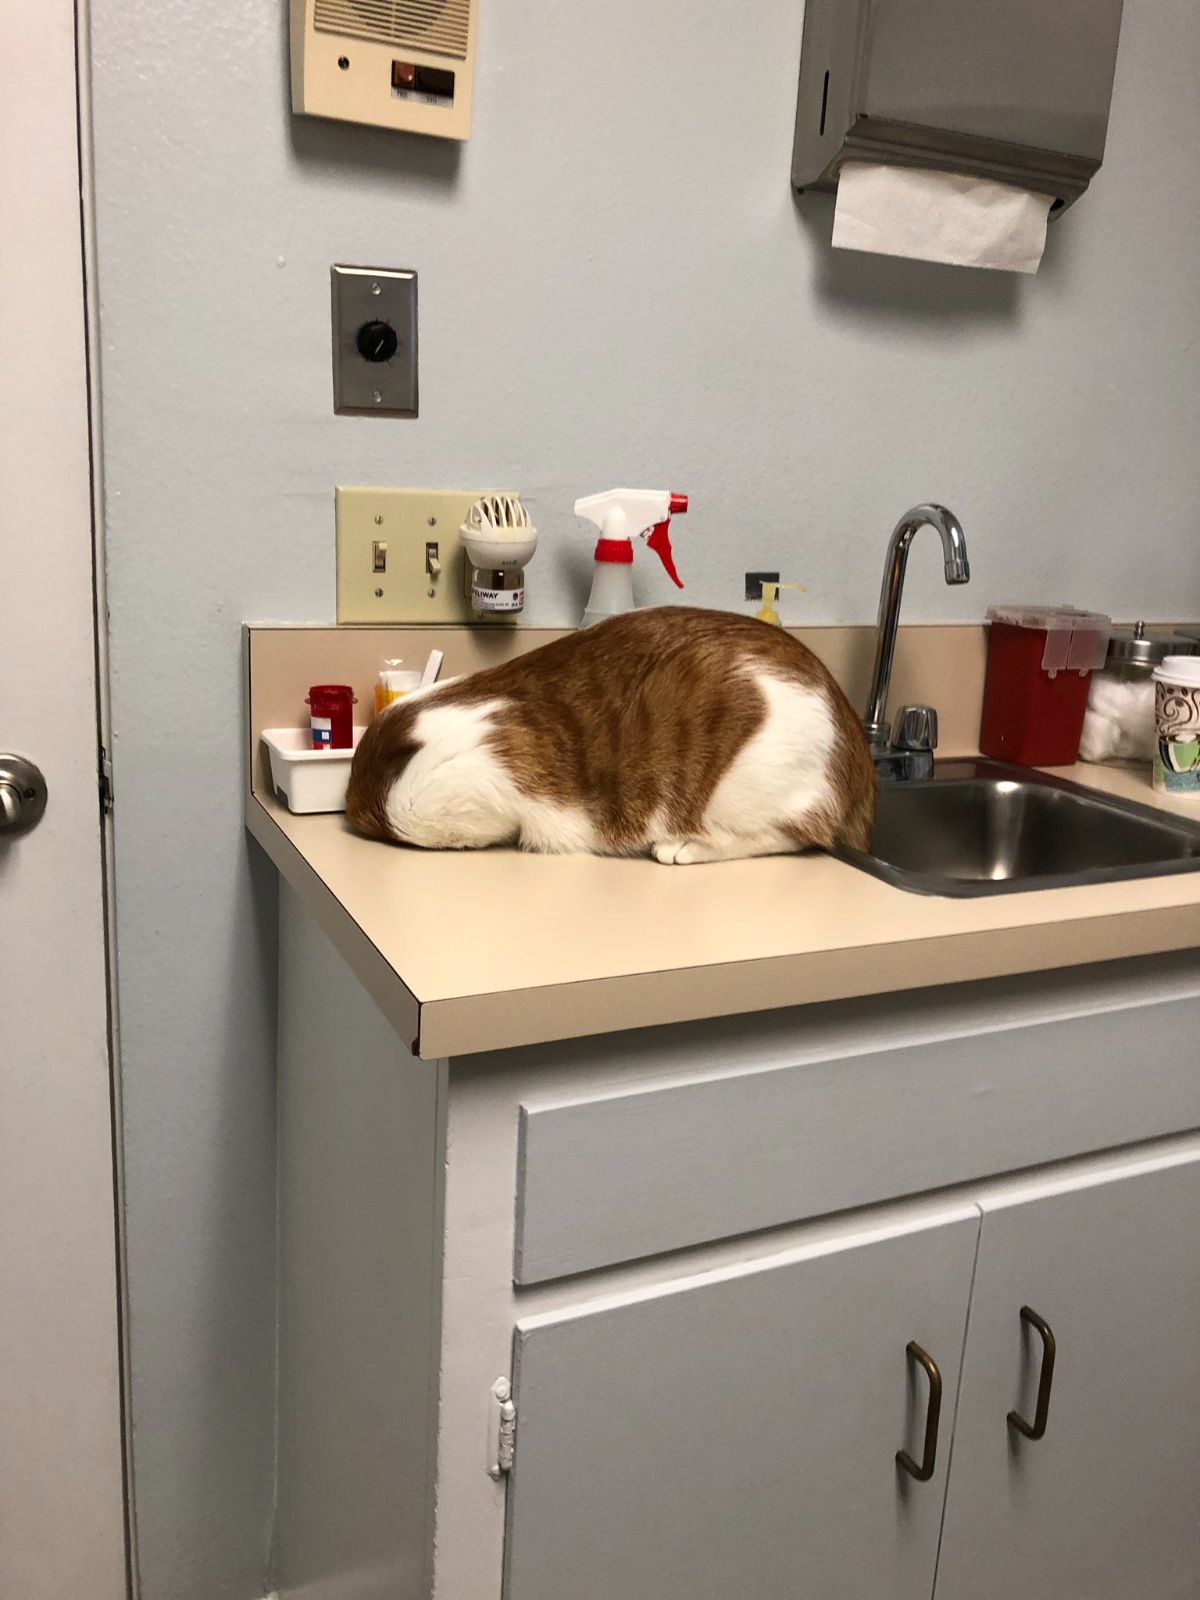 orange and white cat laying on a counter and sticking its head in a trash hole in the counter